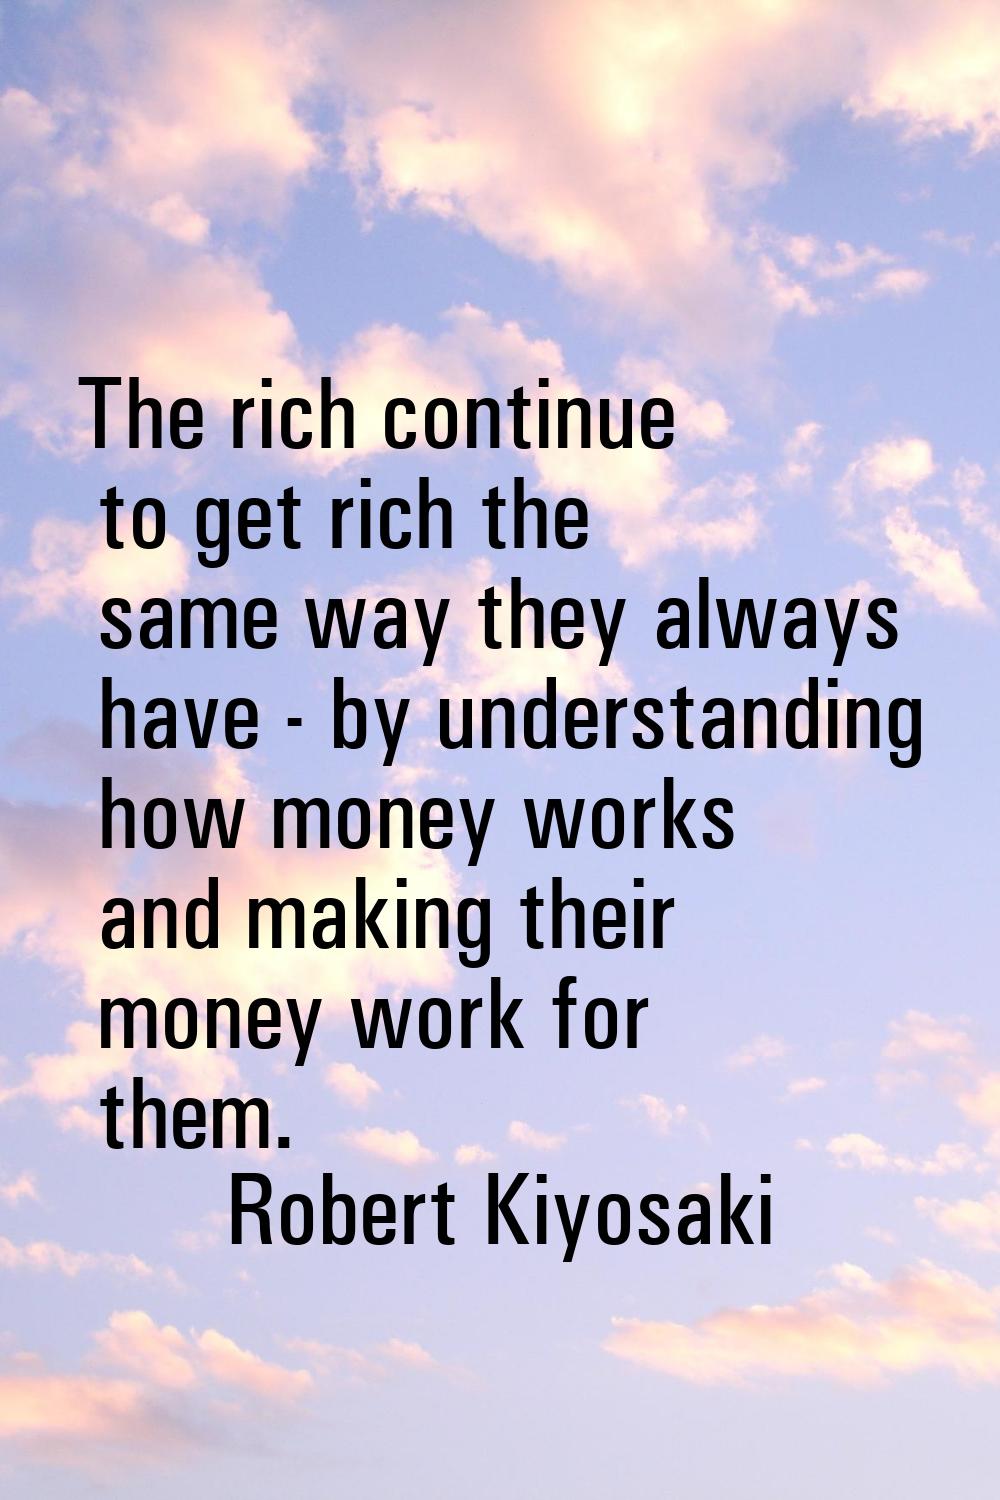 The rich continue to get rich the same way they always have - by understanding how money works and 